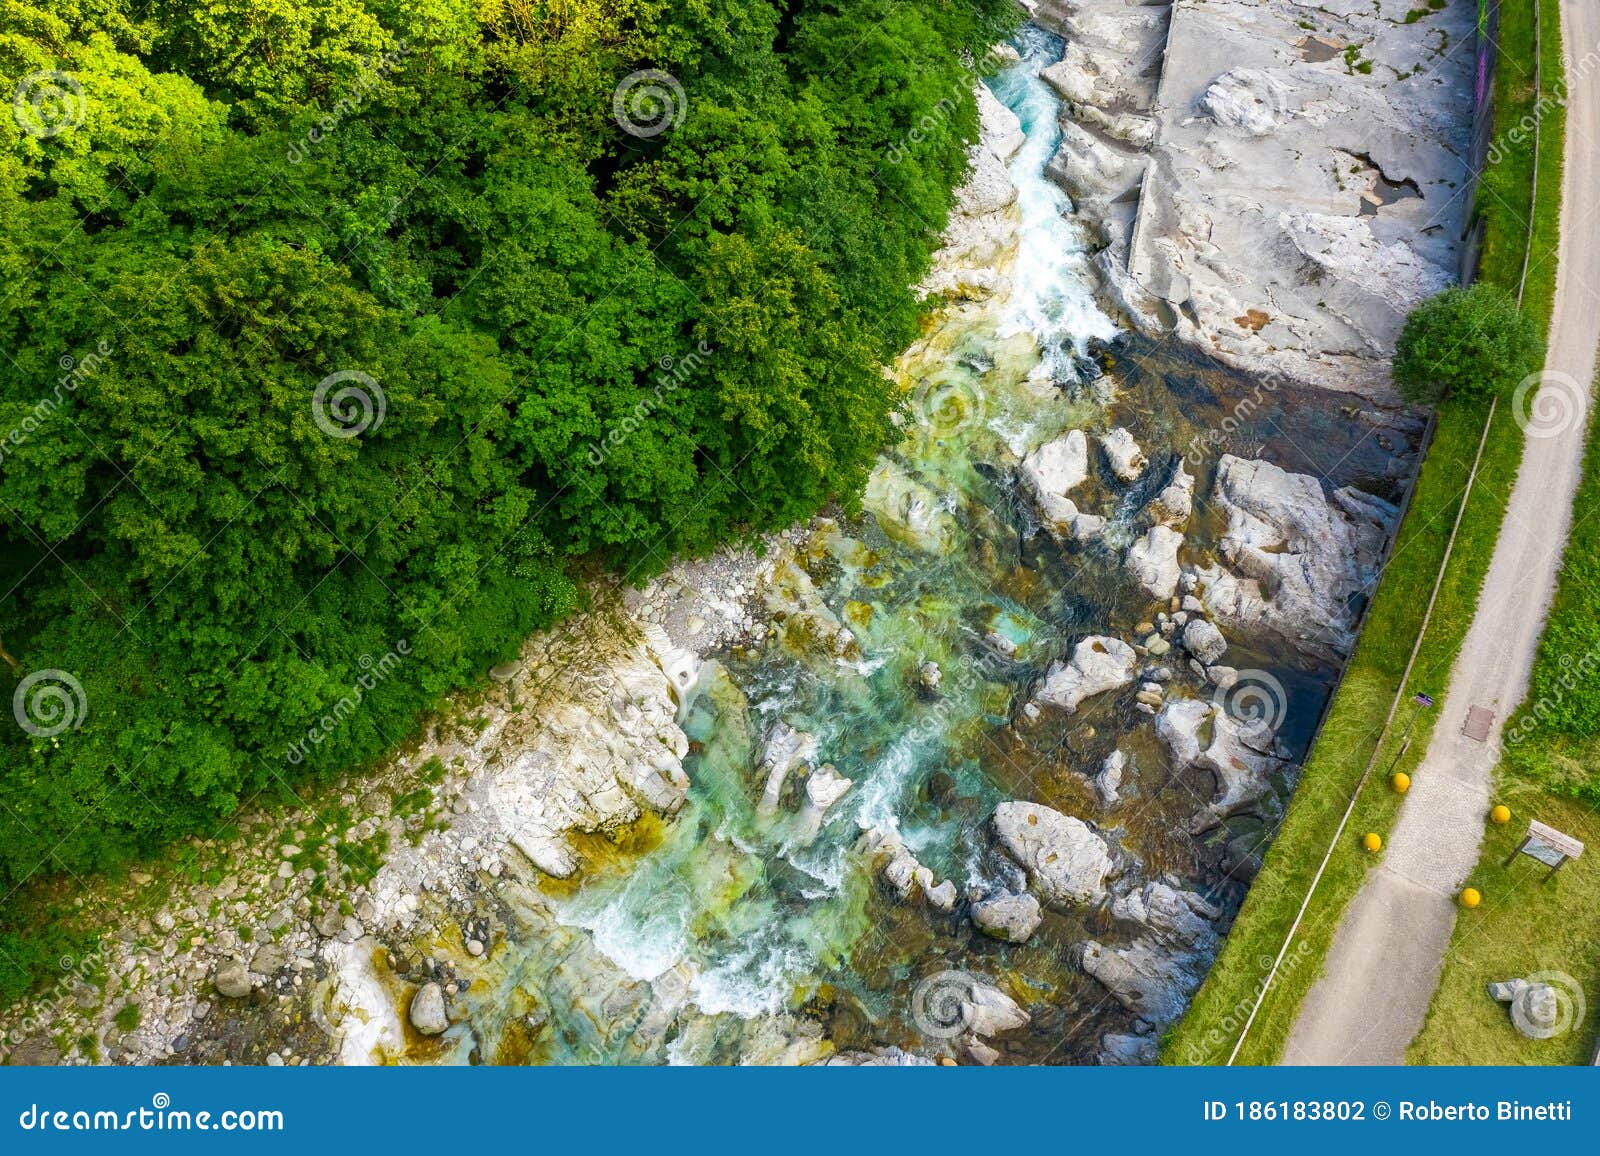 wonderful aerial view of the serio river